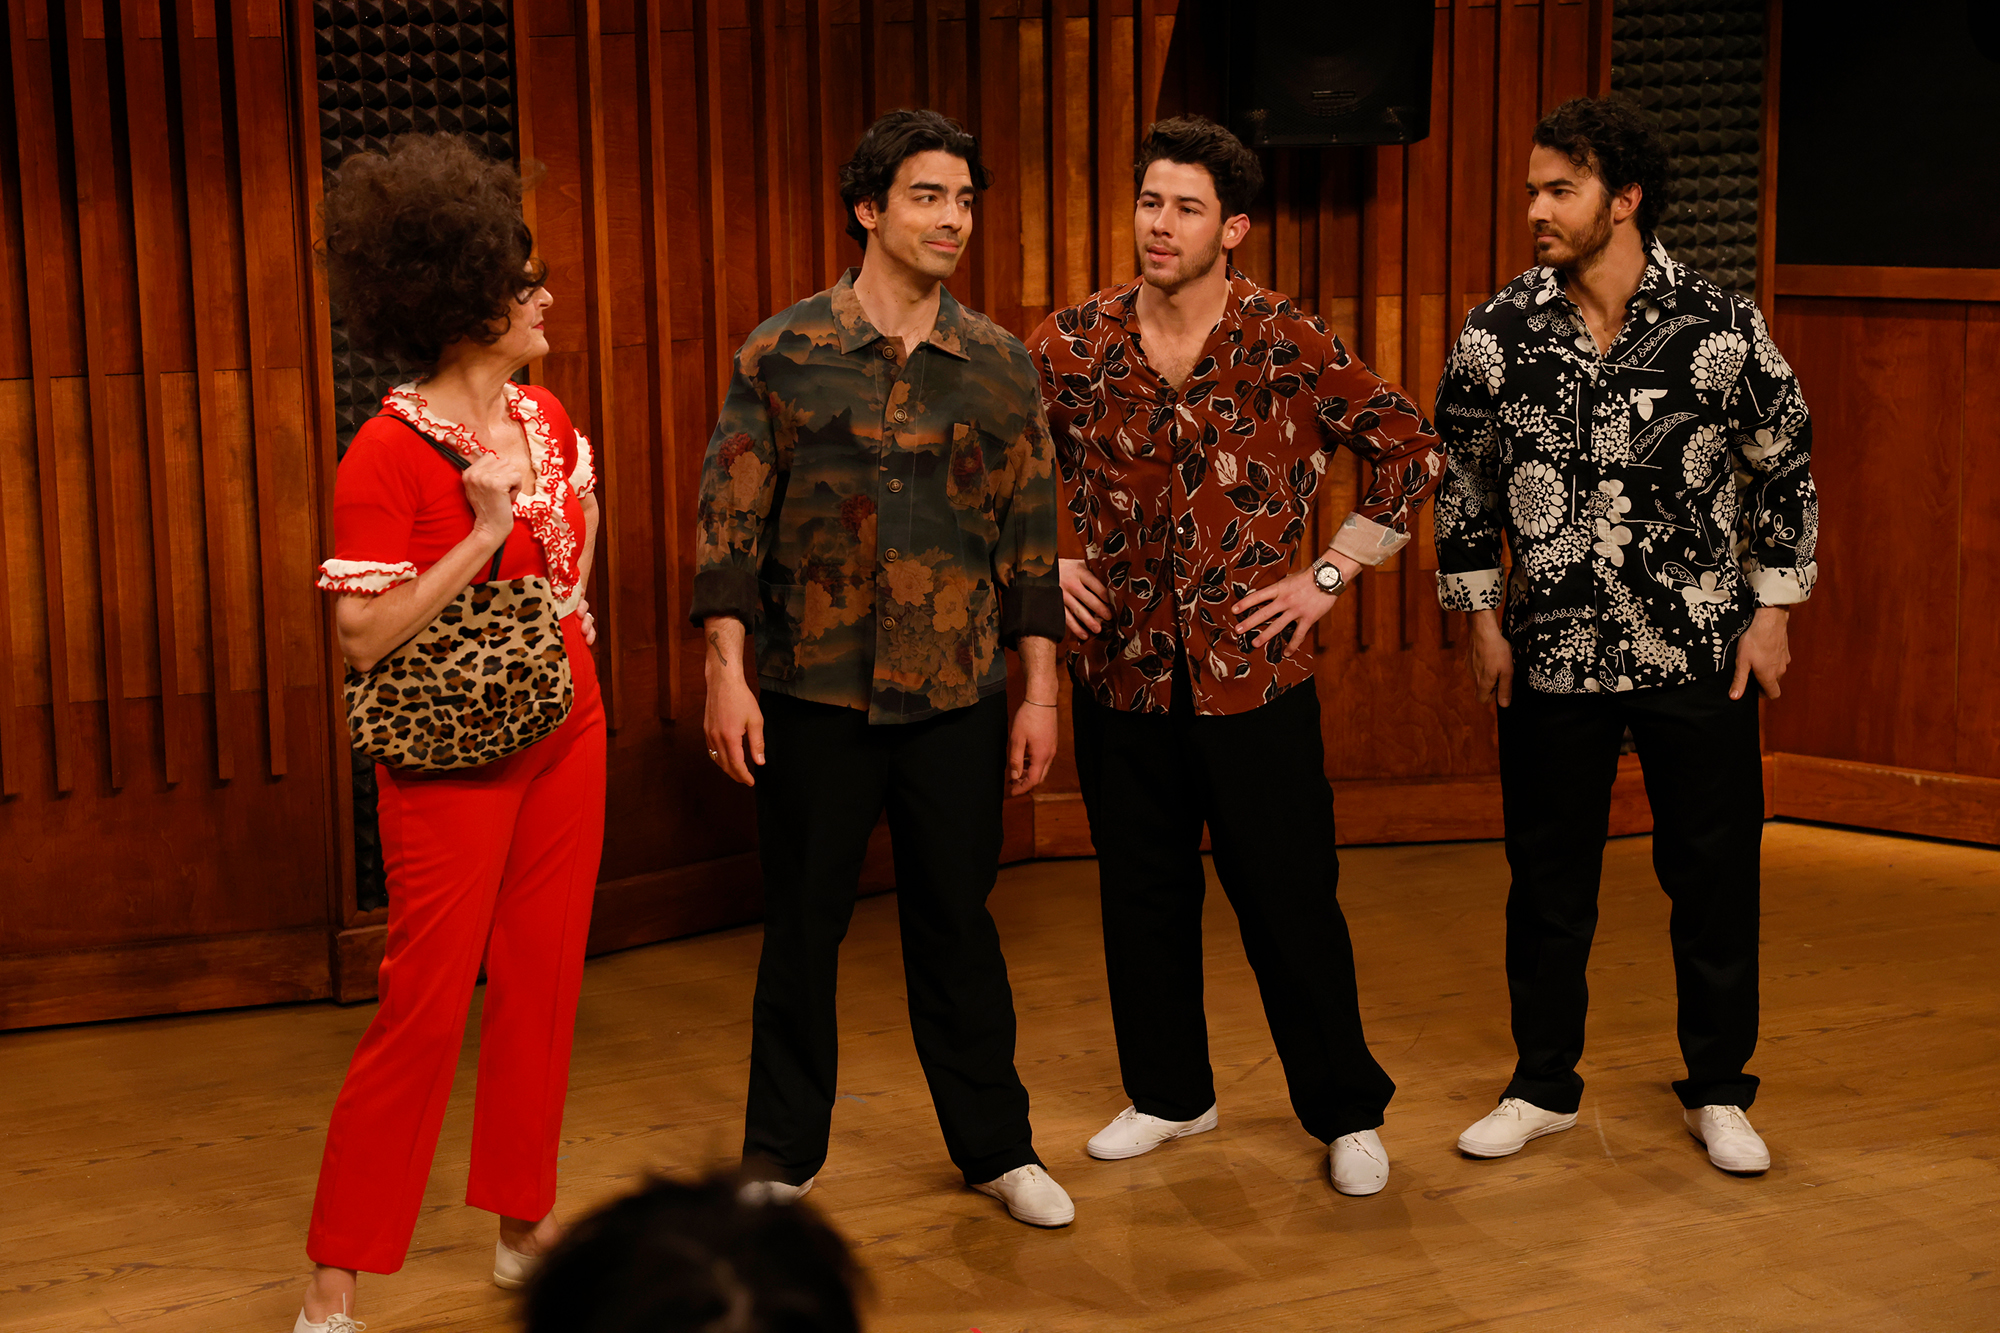 Watch Jonas Brothers Rock Unitards for Dance Lesson With Molly Shannon